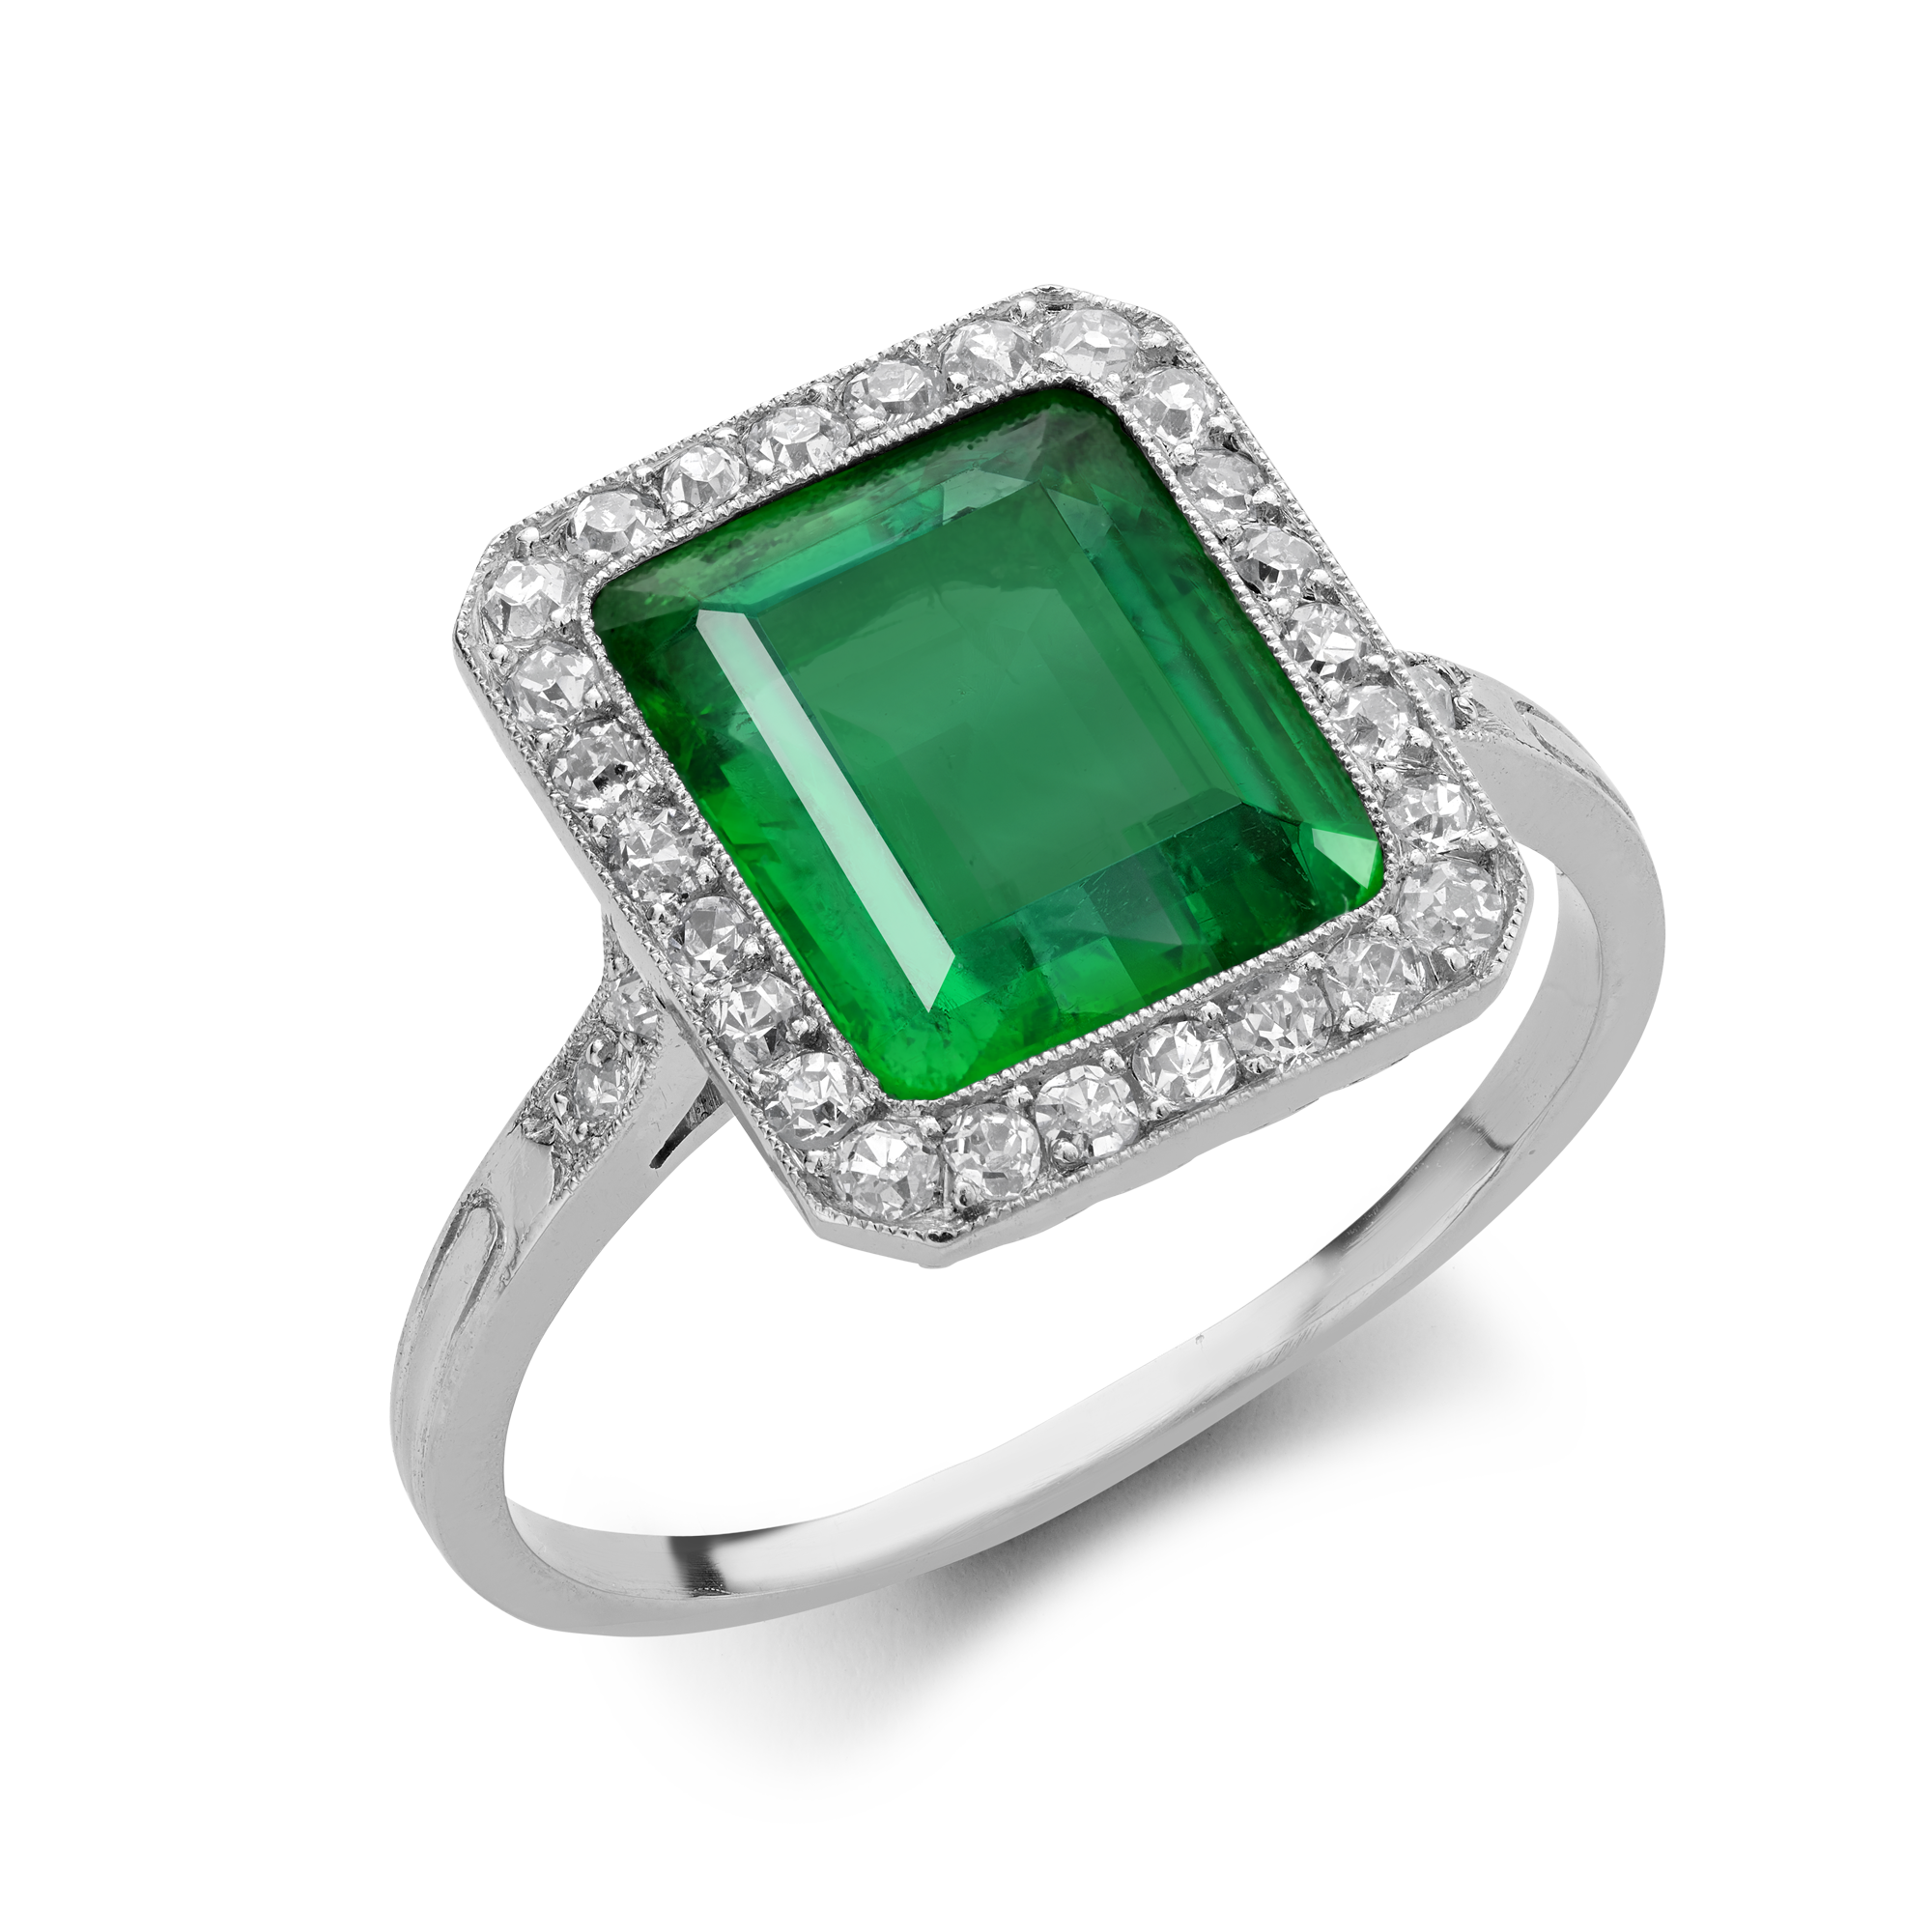 Edwardian 2.80ct Colombian Emerald and Diamond Cluster Ring Emerald Cut, Millegrain Set_1